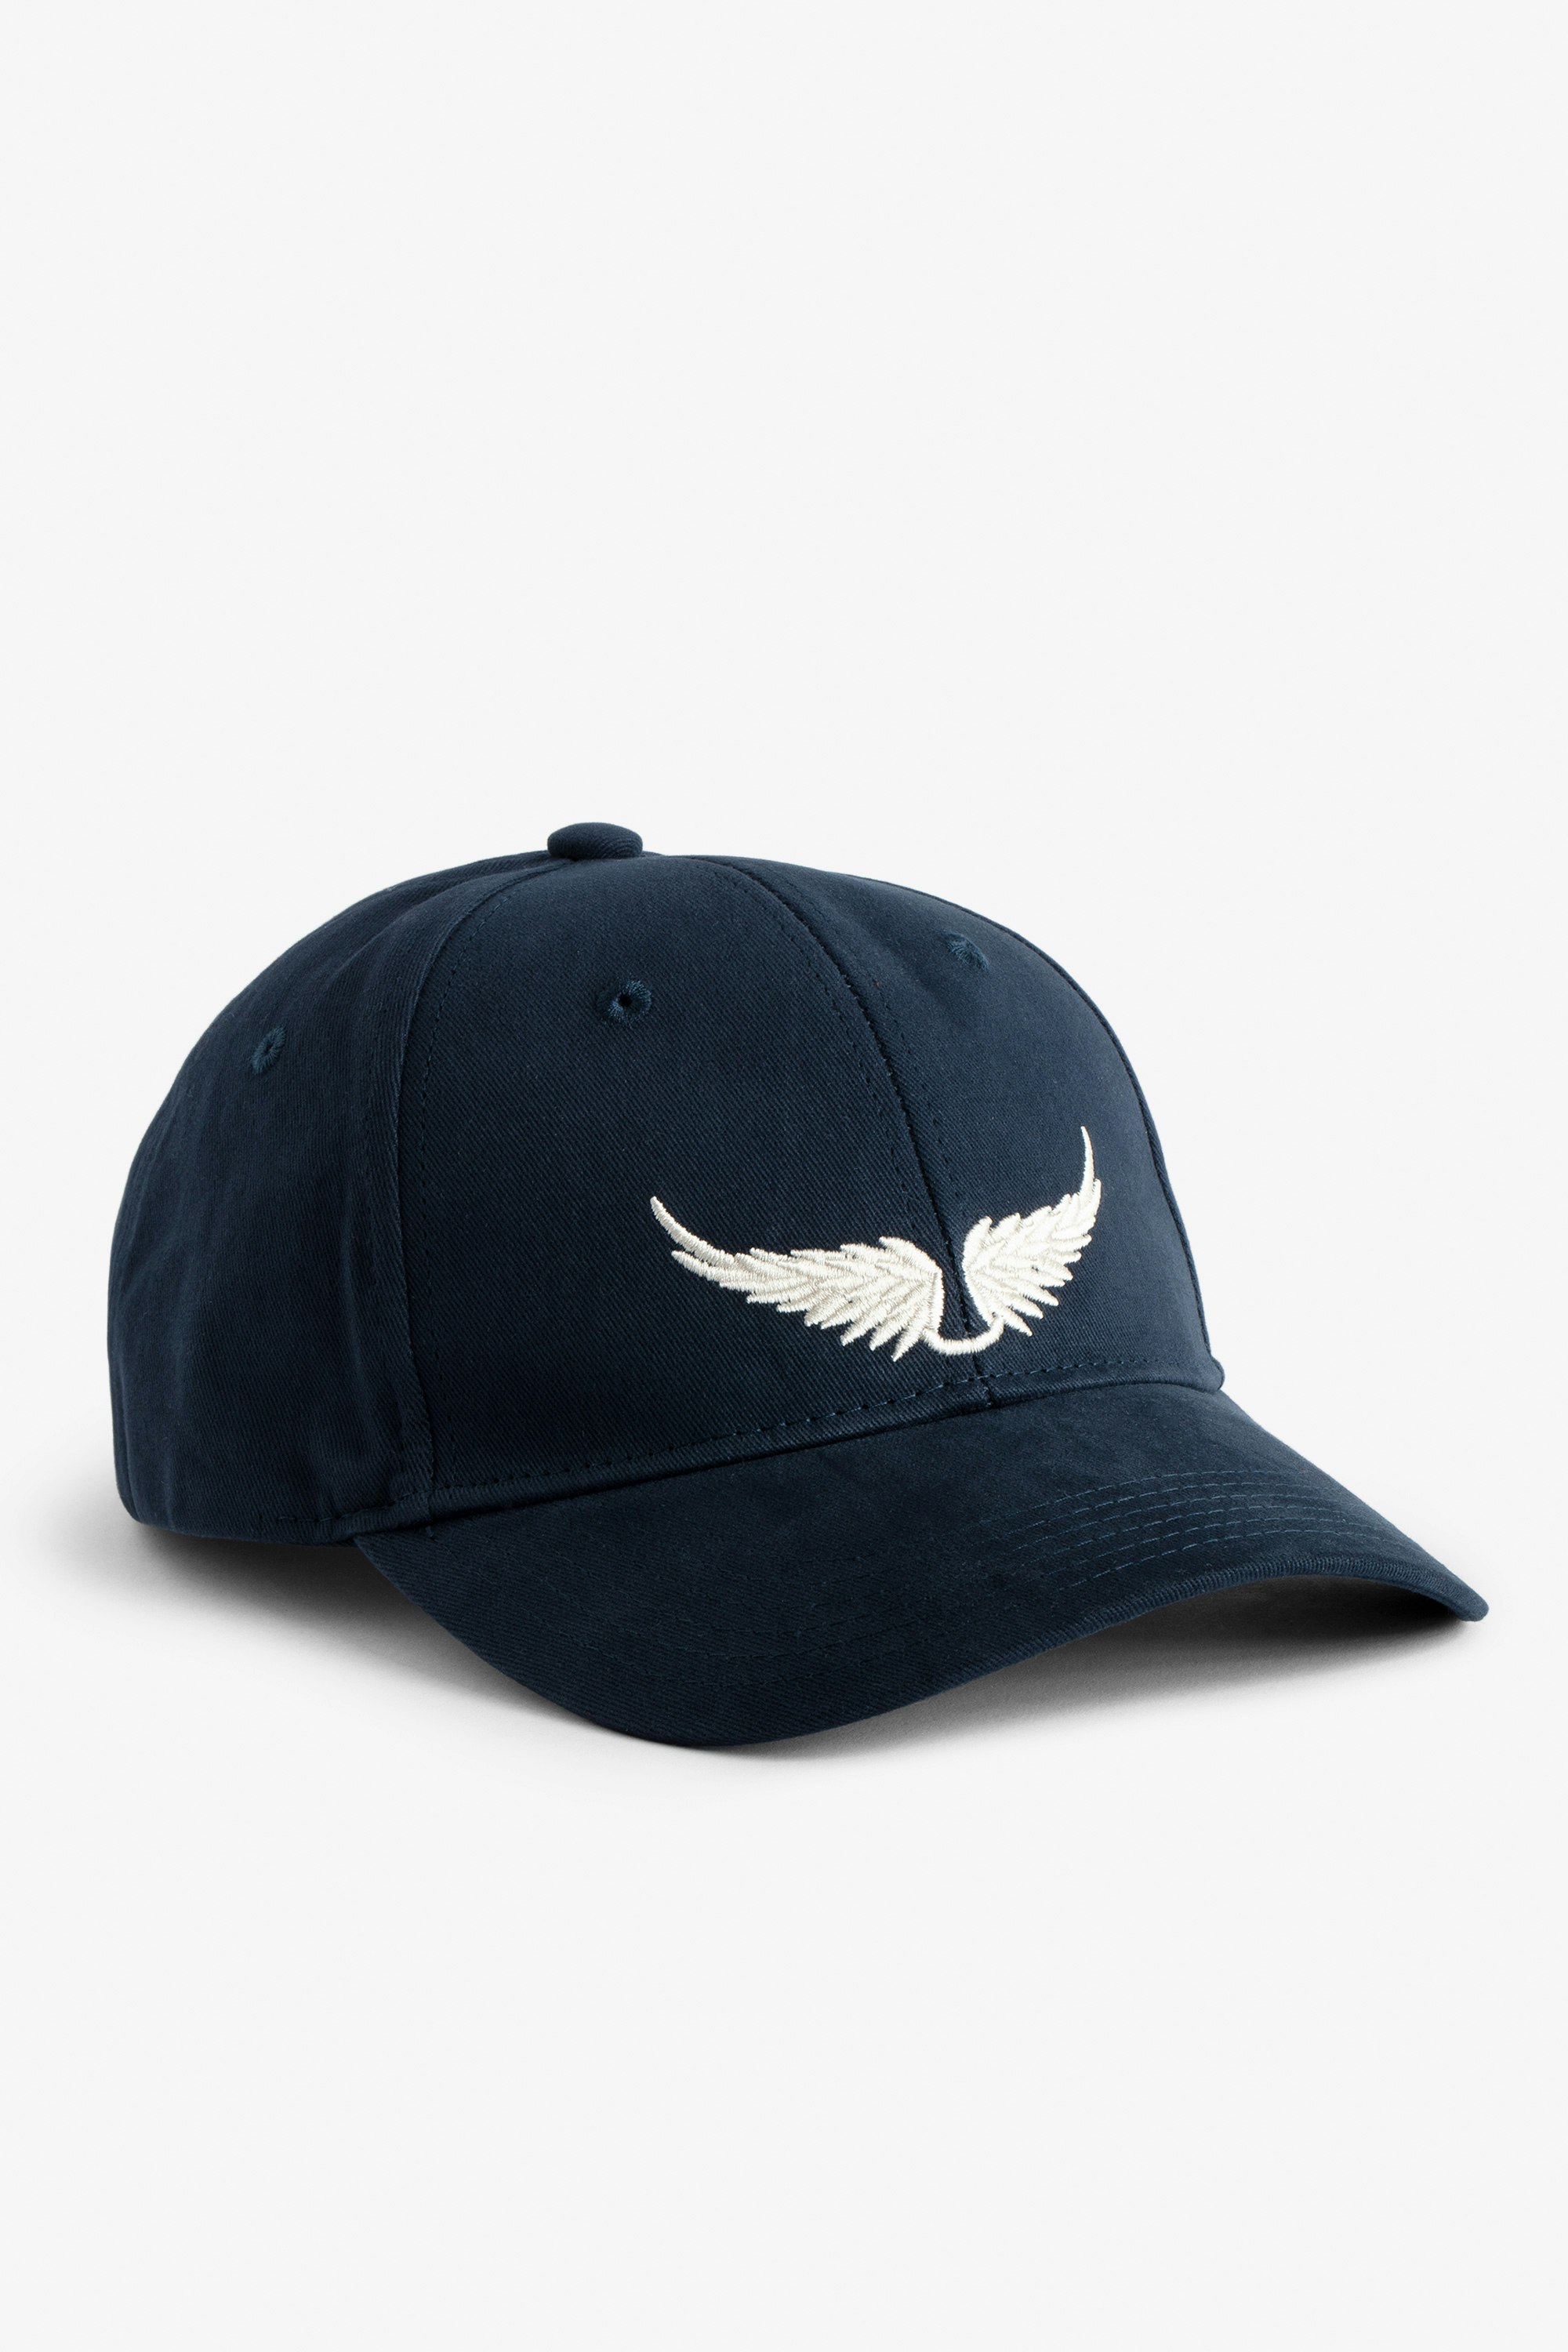 Klelia Rock Baseball Cap Women’s navy blue cotton baseball cap with embroidered wings.